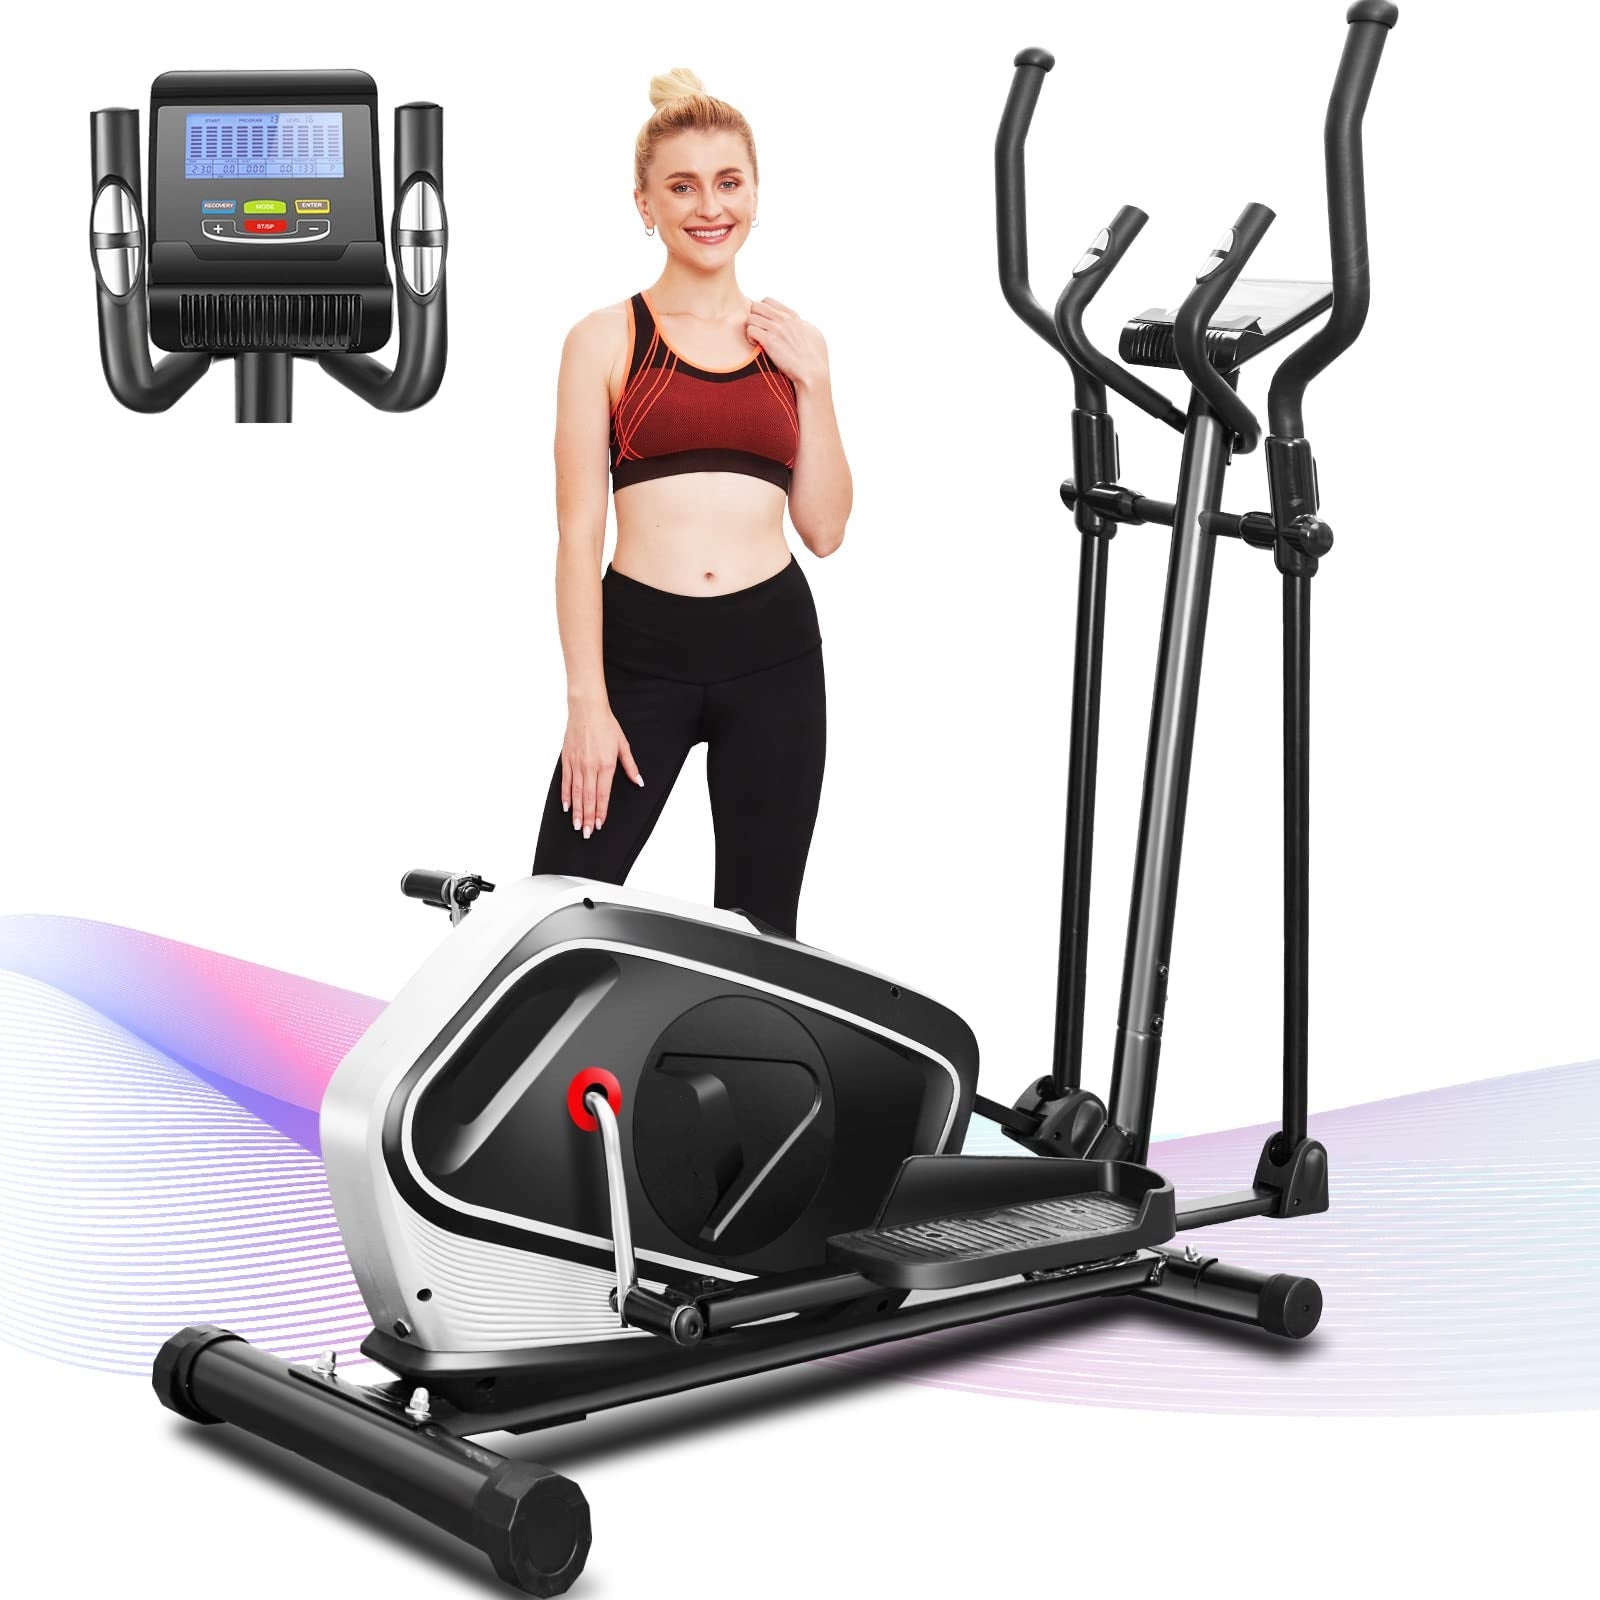 Electric Elliptical Machine for Home, Cross Trainer for Home Use, 390 LB Max Weight